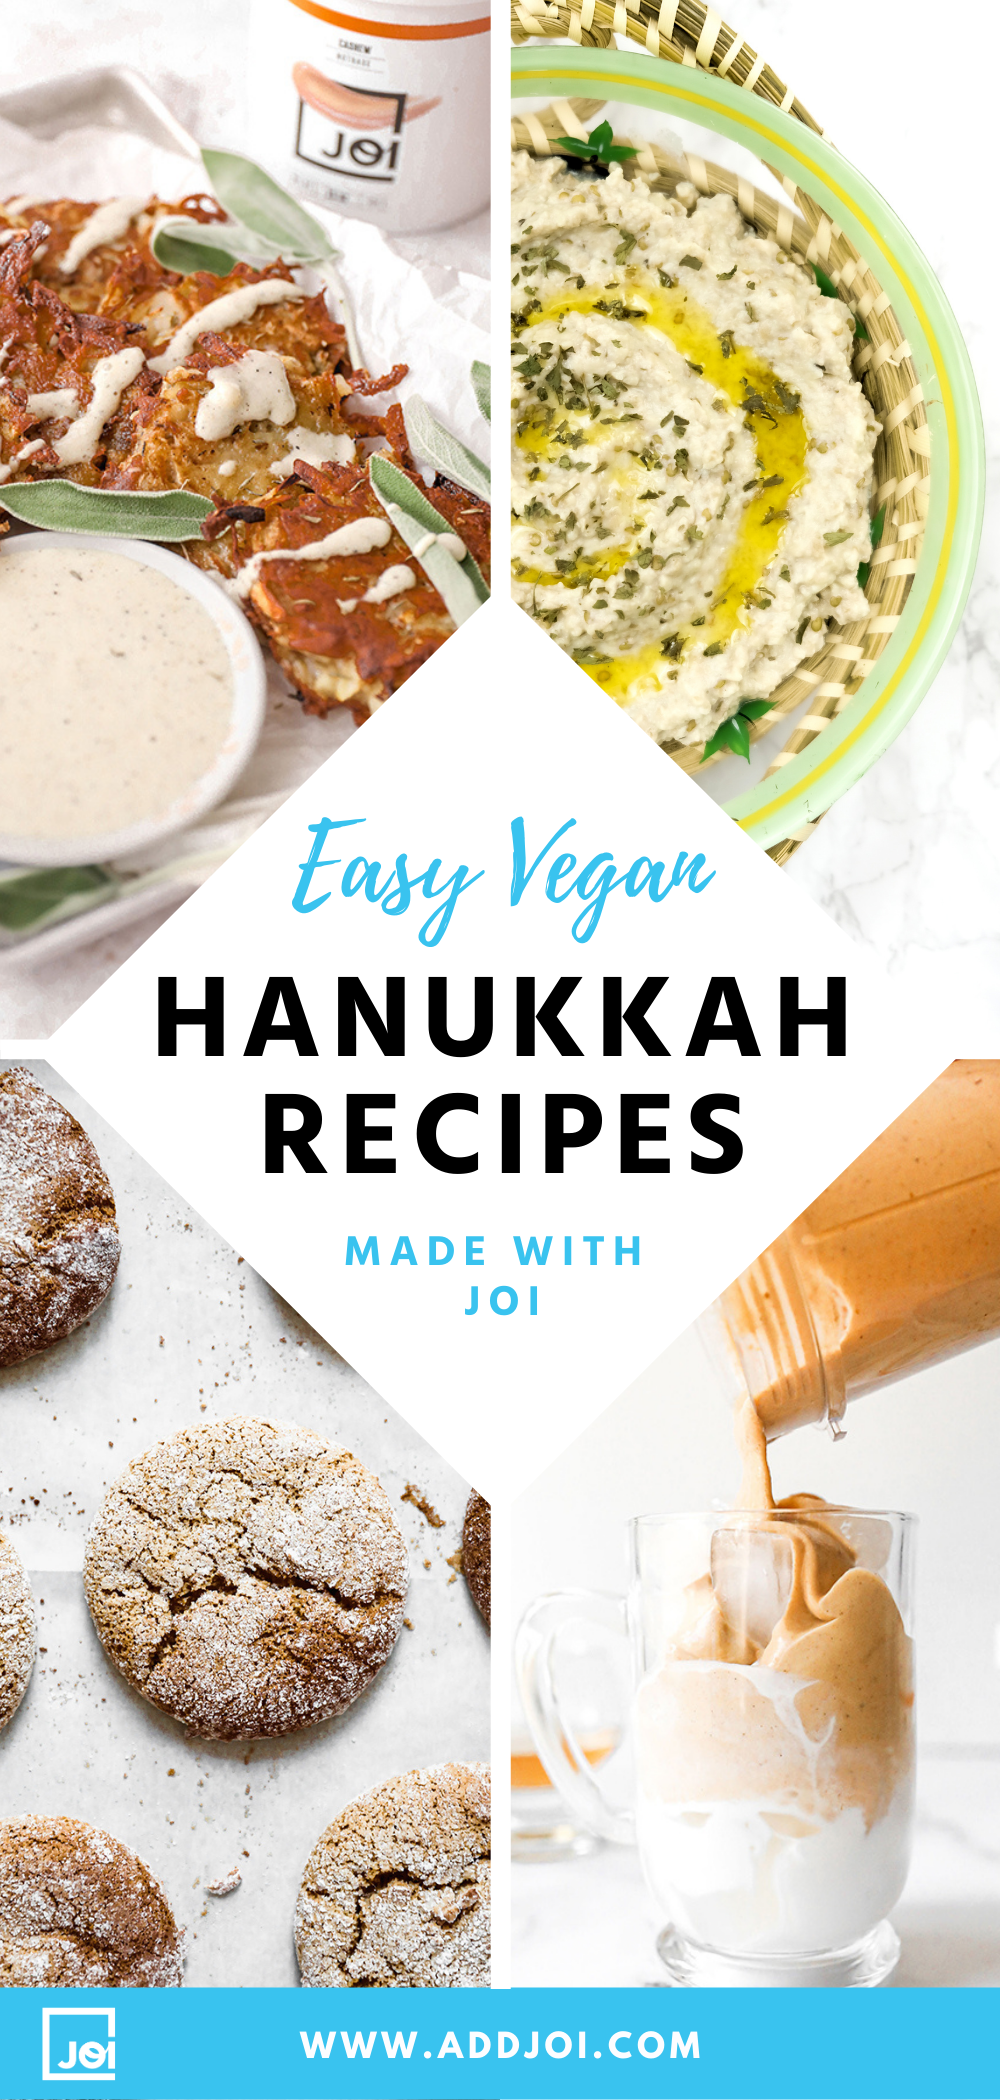 Vegan Takes on Hanukkah Traditions to Plan Your Perfect Holiday Menu | Made with JOI